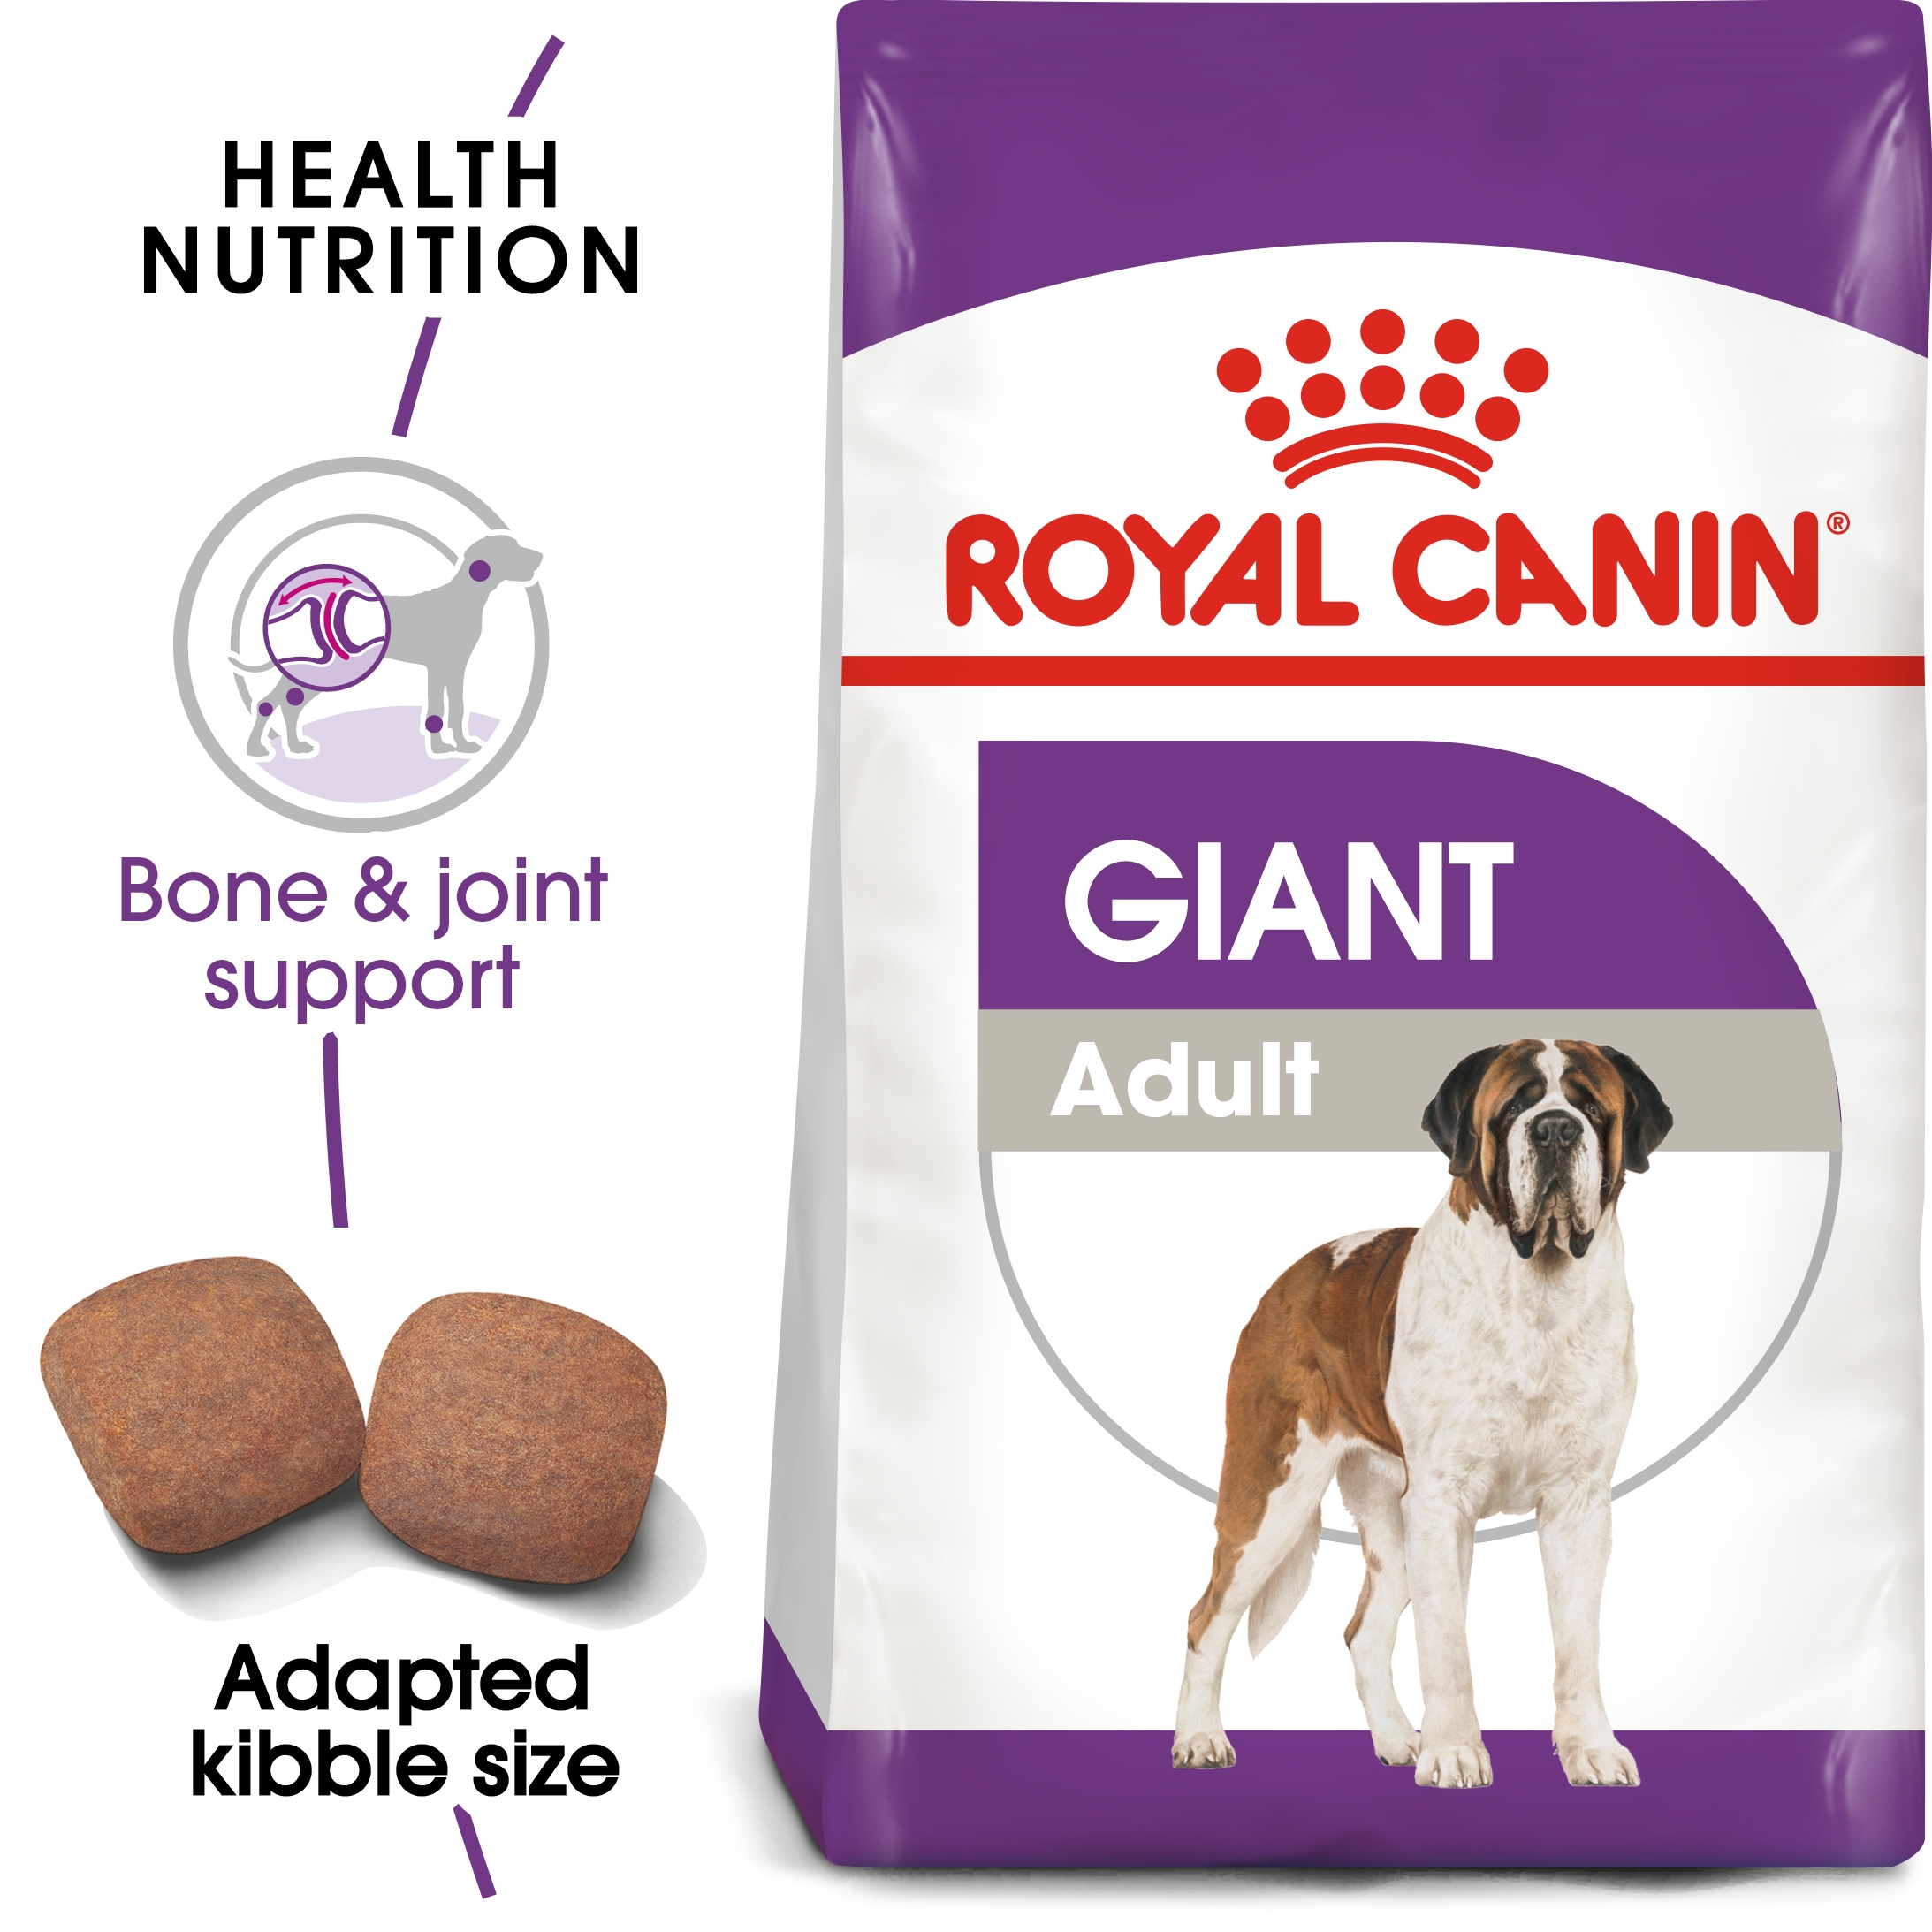 Royal Canin Size Health Nutrition Giant Adult 15 Kg